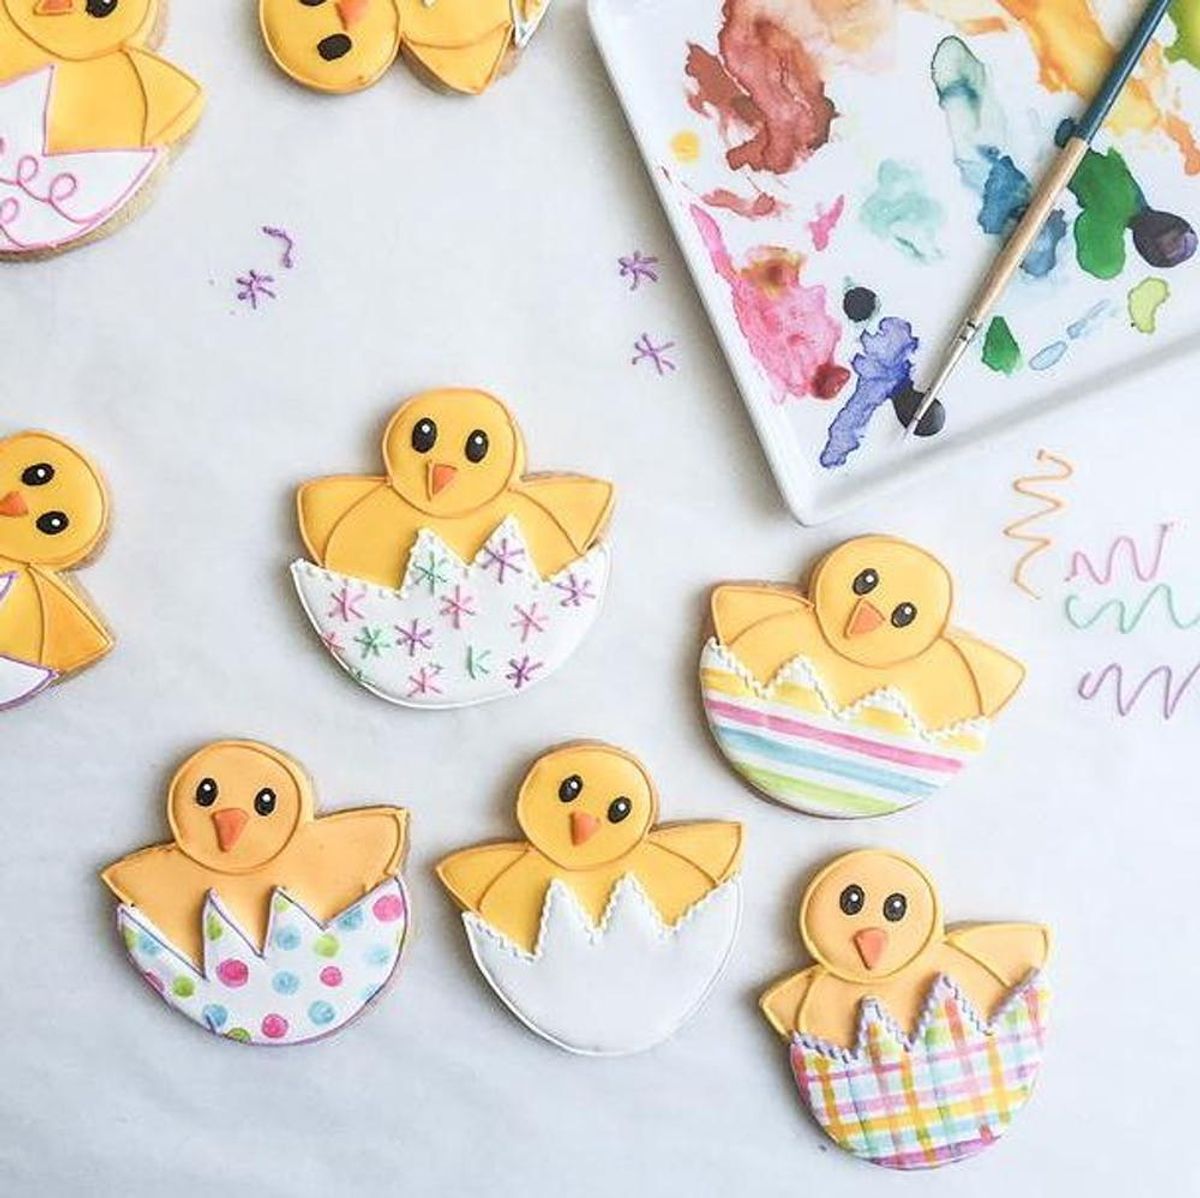 Here’s the Easiest Way to Learn Some Pro Cookie Decorating Skills